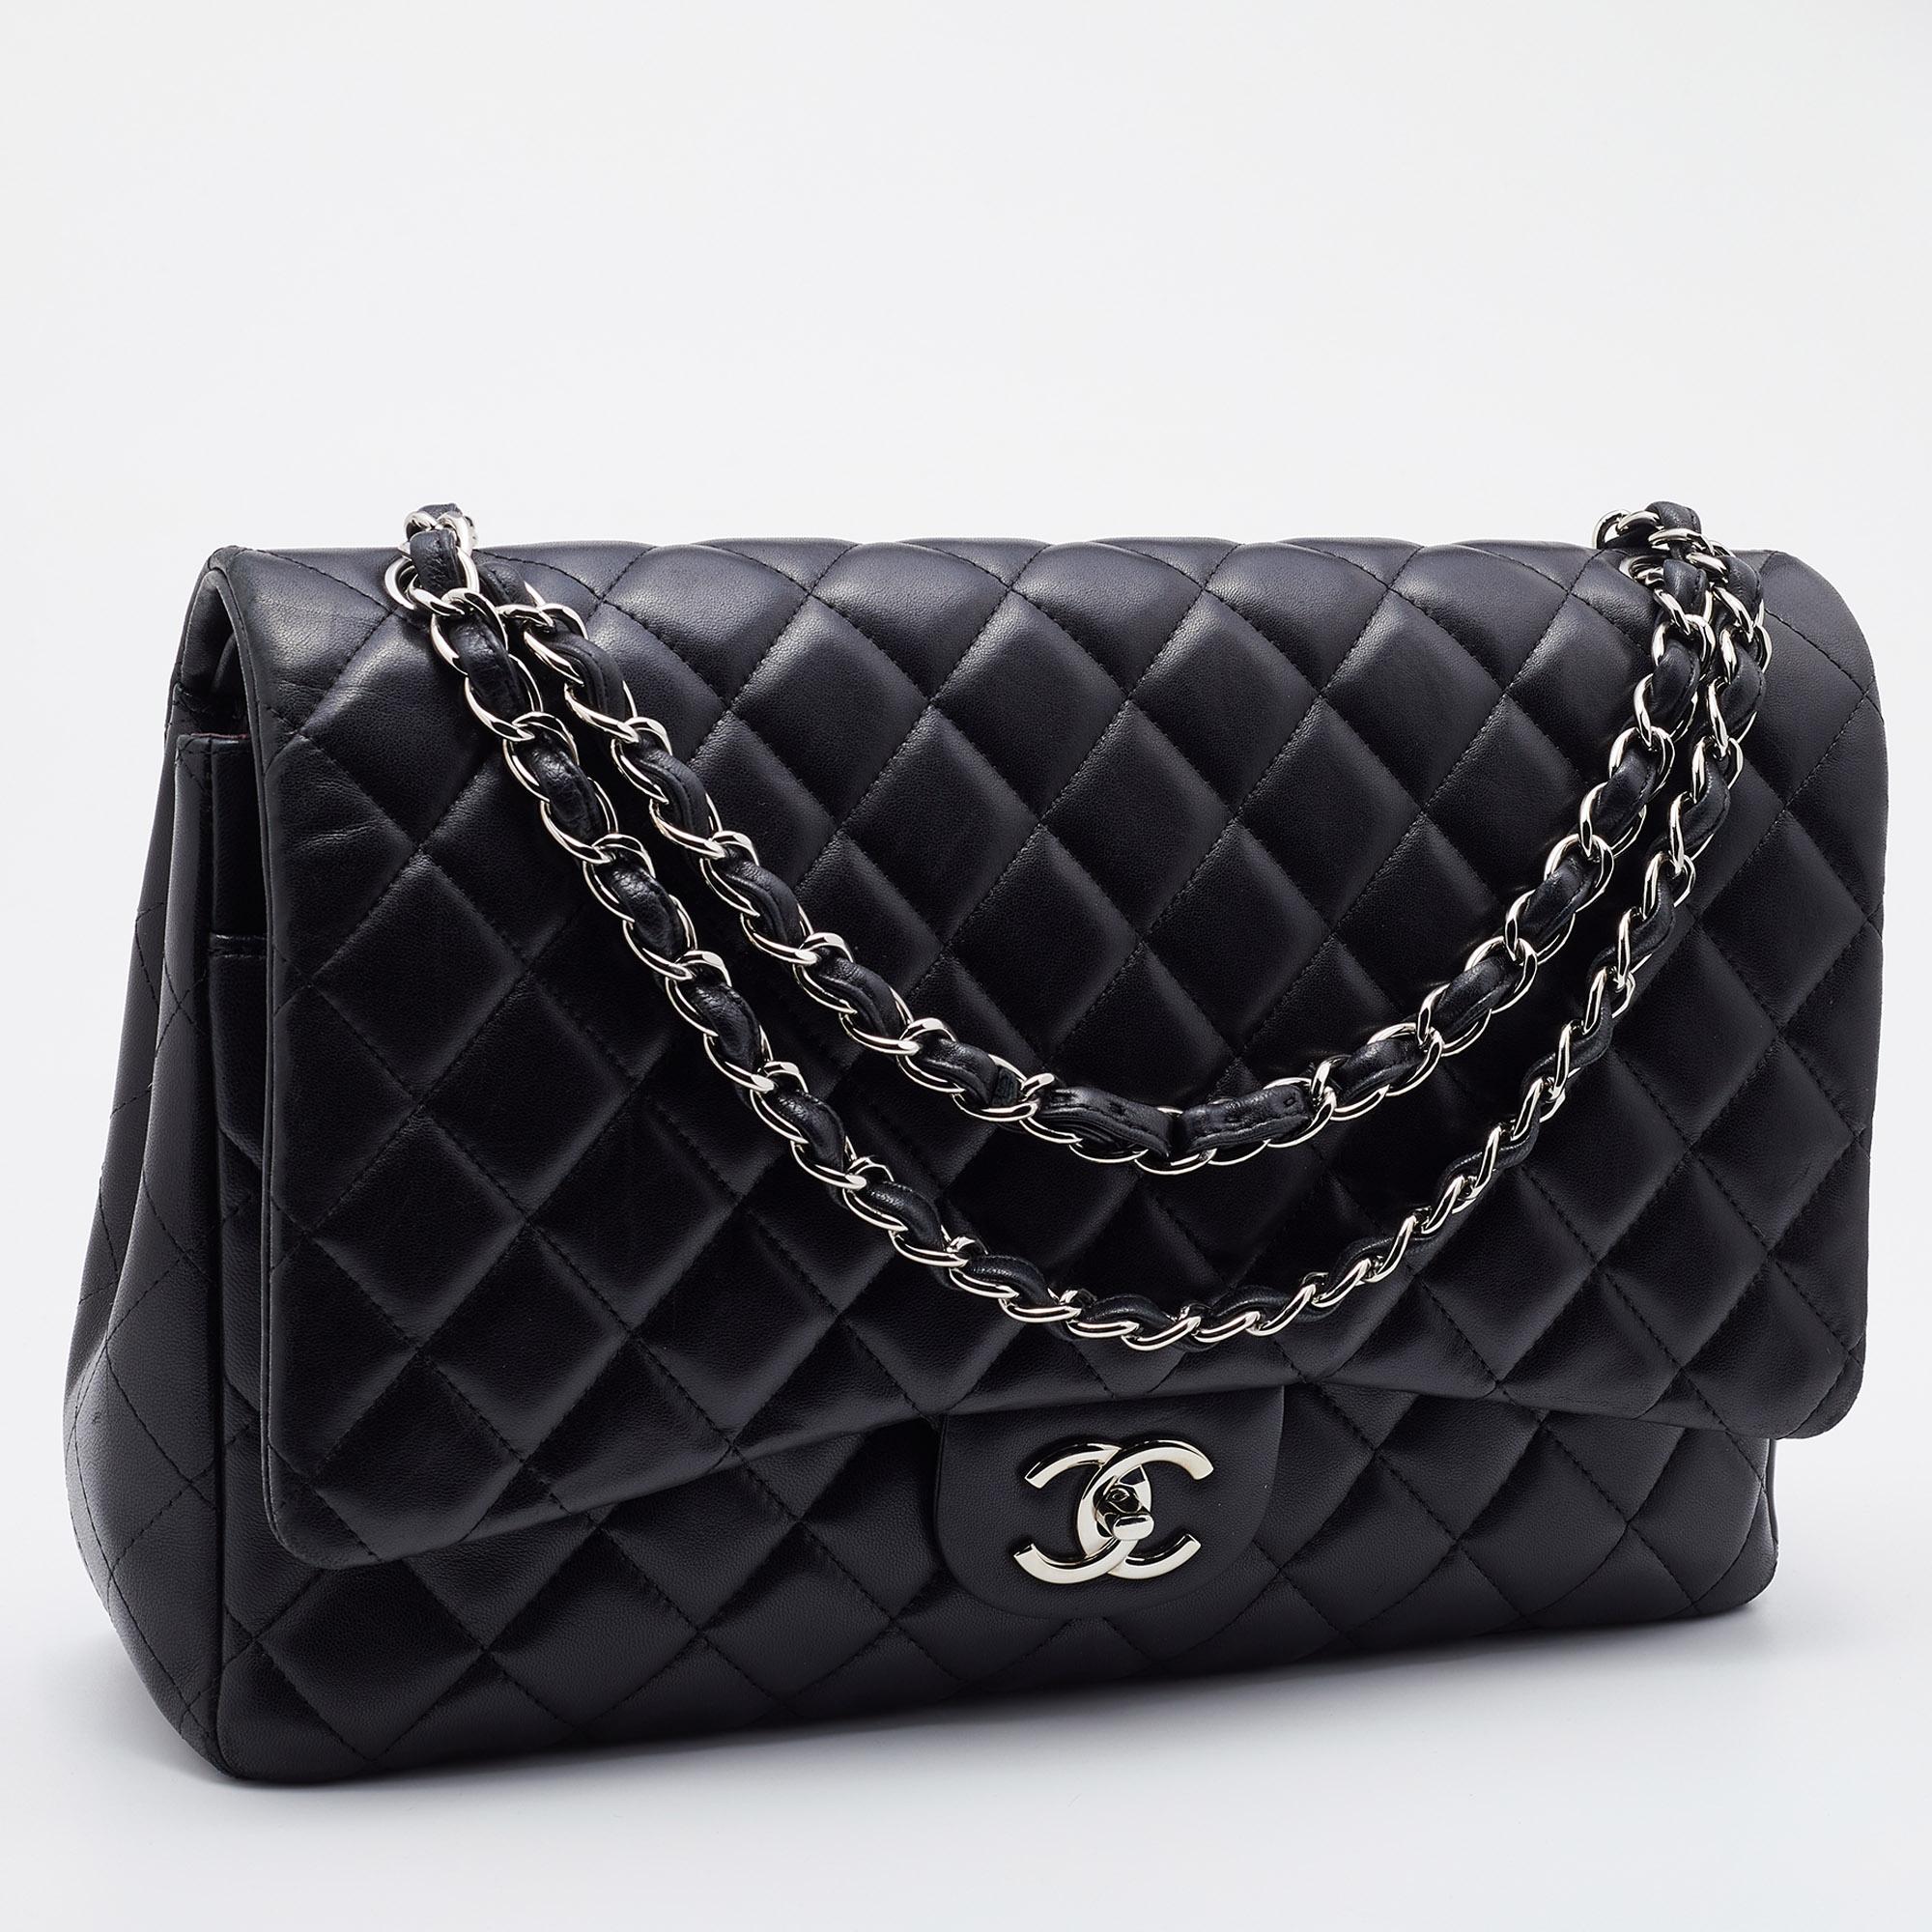 Women's Chanel Black Quilted Leather Maxi Classic Double Flap Bag